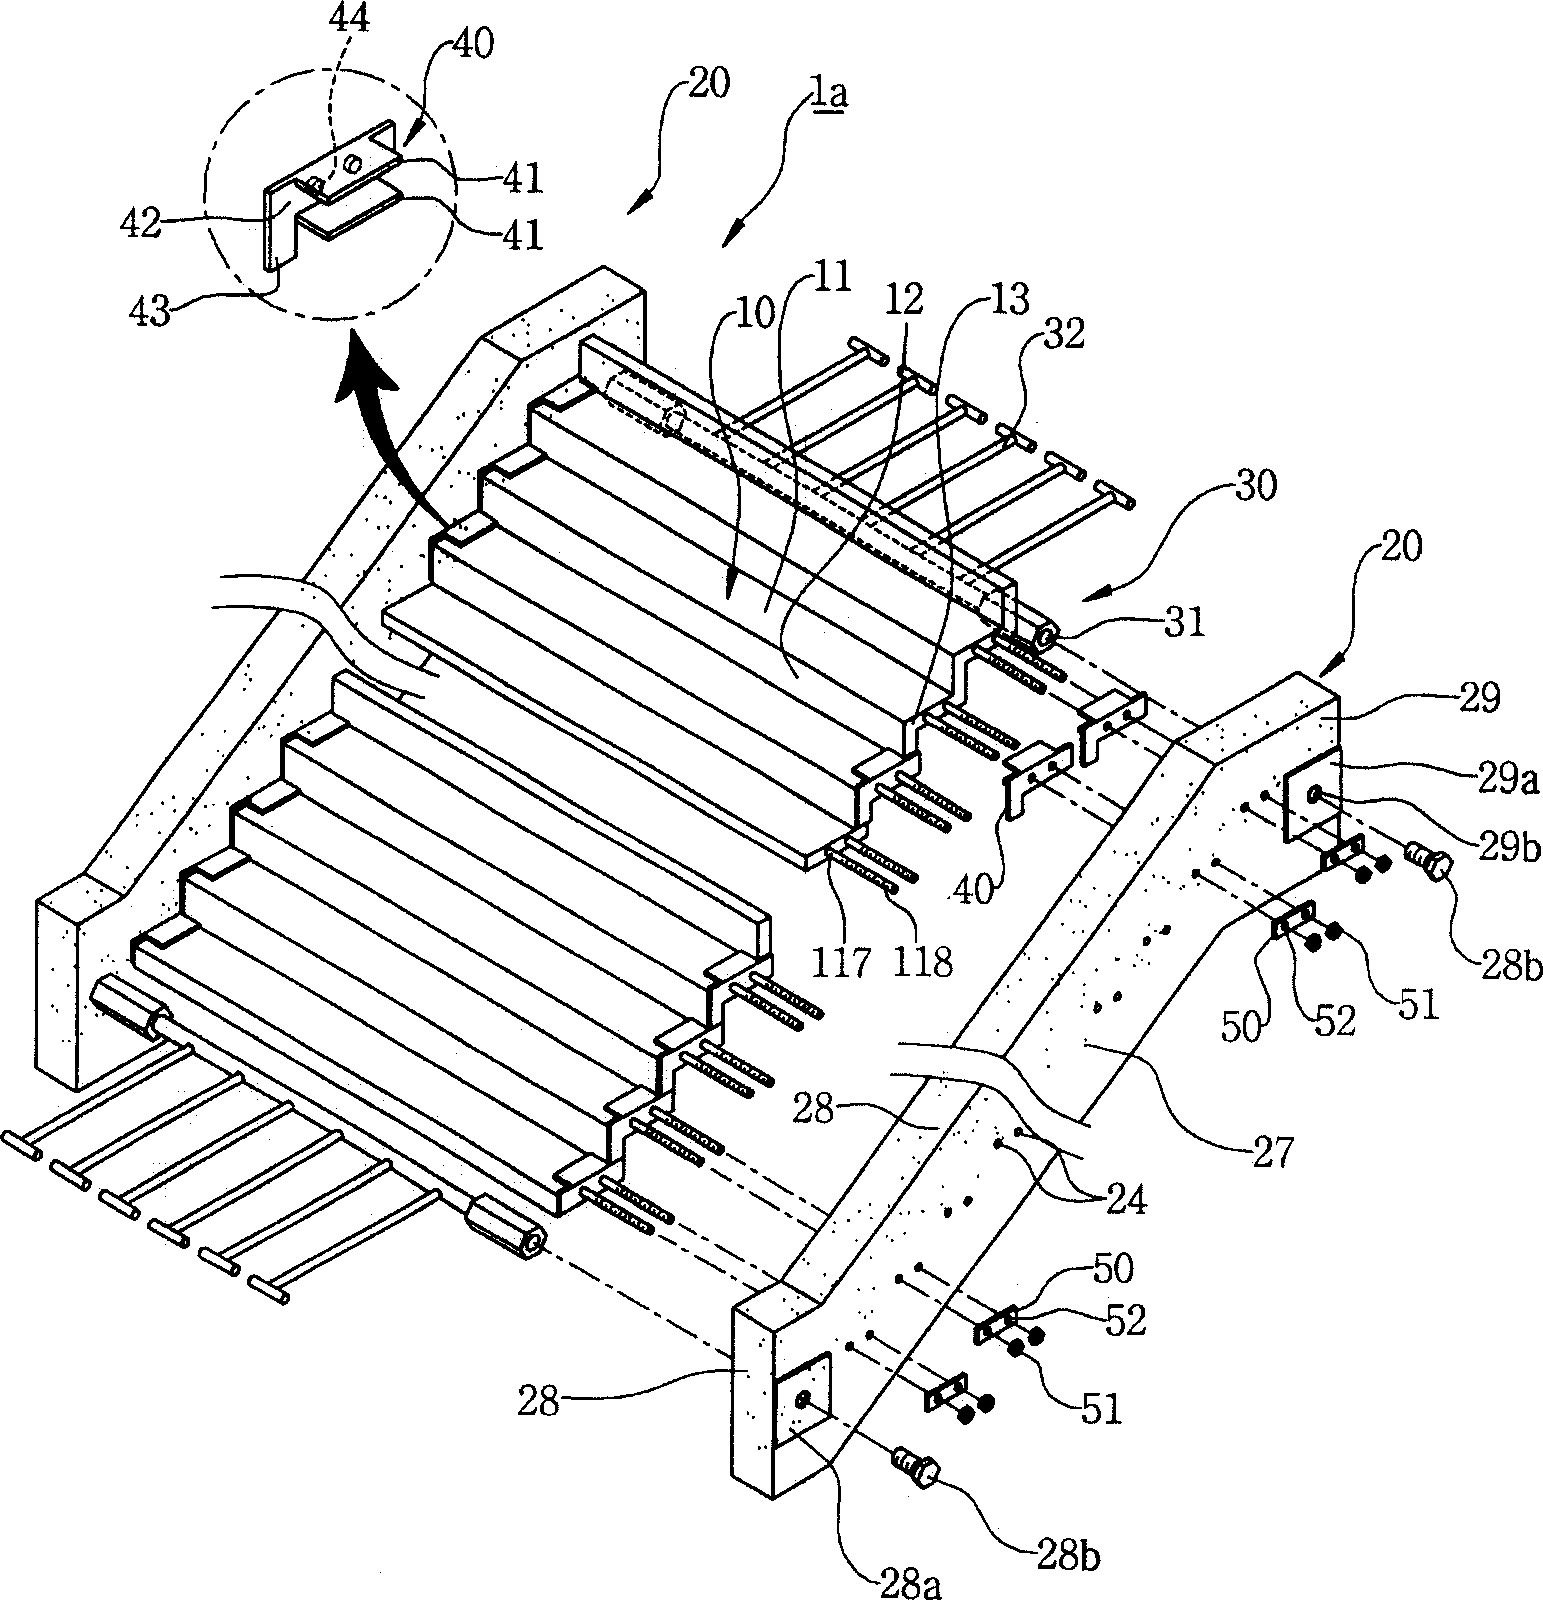 Precast stairway system, unit structure thereof, and method of constructing stairway system using the same